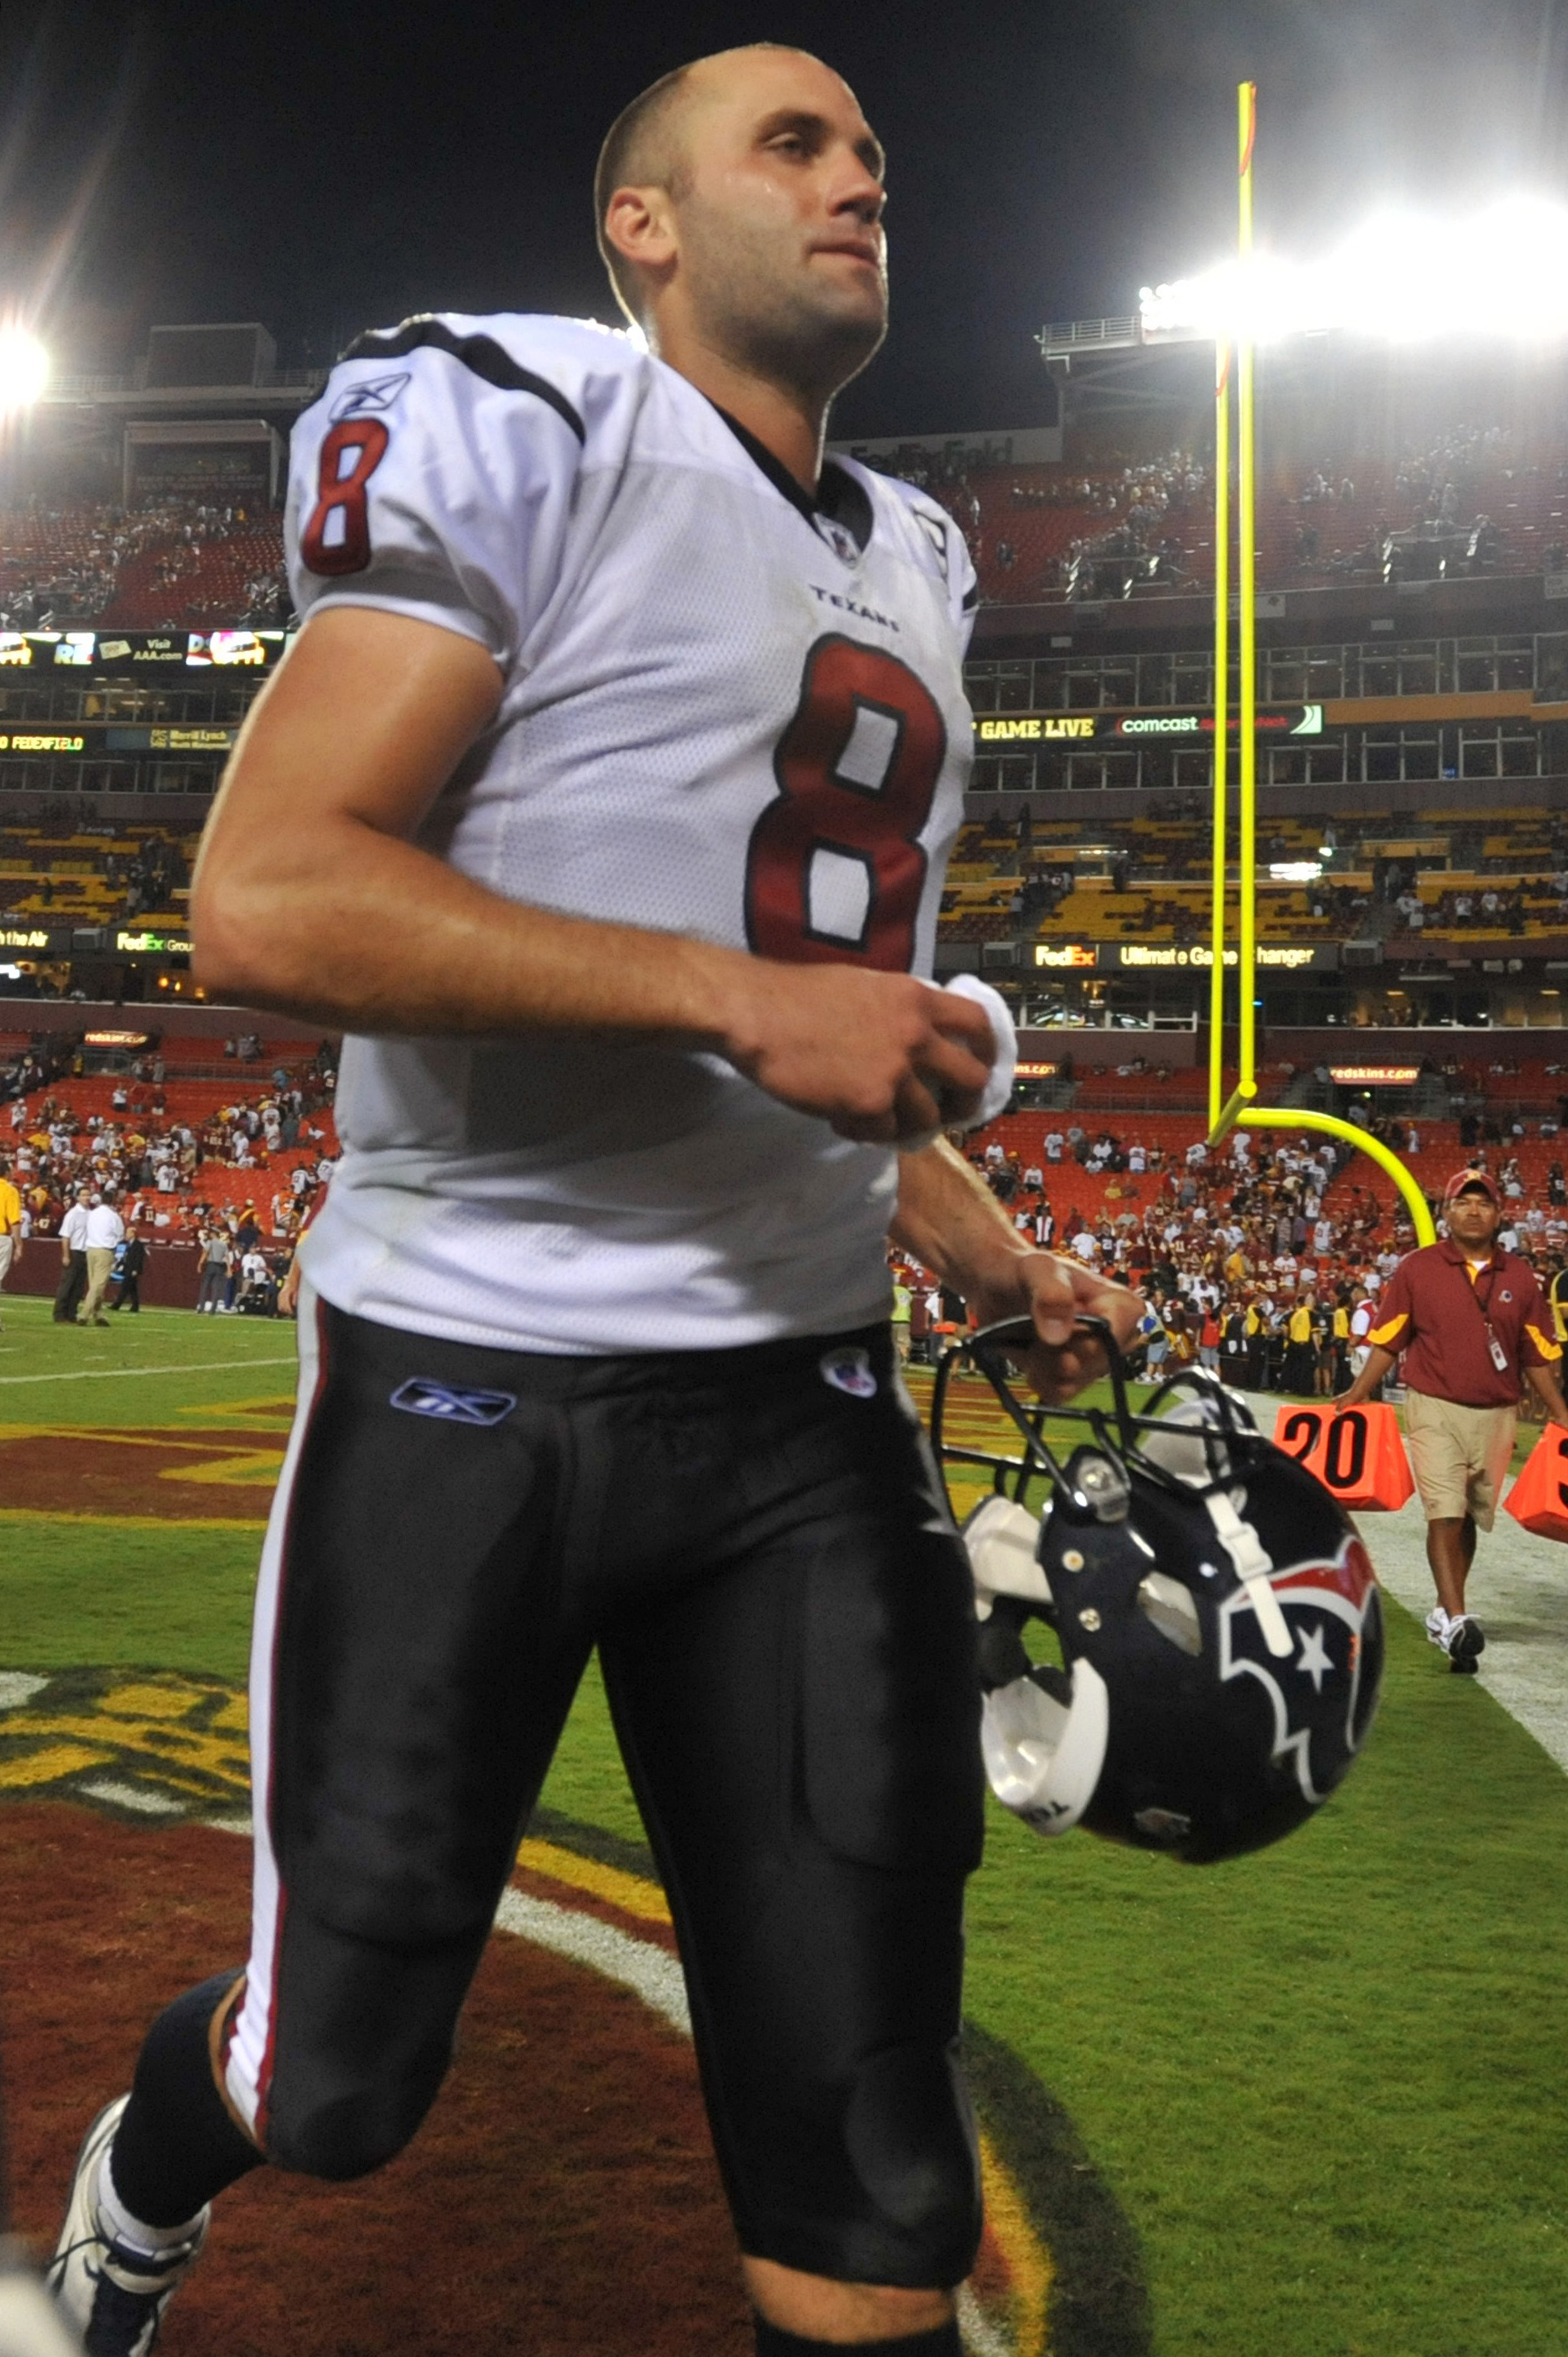 LANDOVER - SEPTEMBER 19:  Matt Schaub #8 of the Houston Texans runs off the field after the game against the Washington Redskins at FedExField on September 19, 2010 in Landover, Maryland. The Texans defeated the Redskins 30-27 in overtime. (Photo by Larry